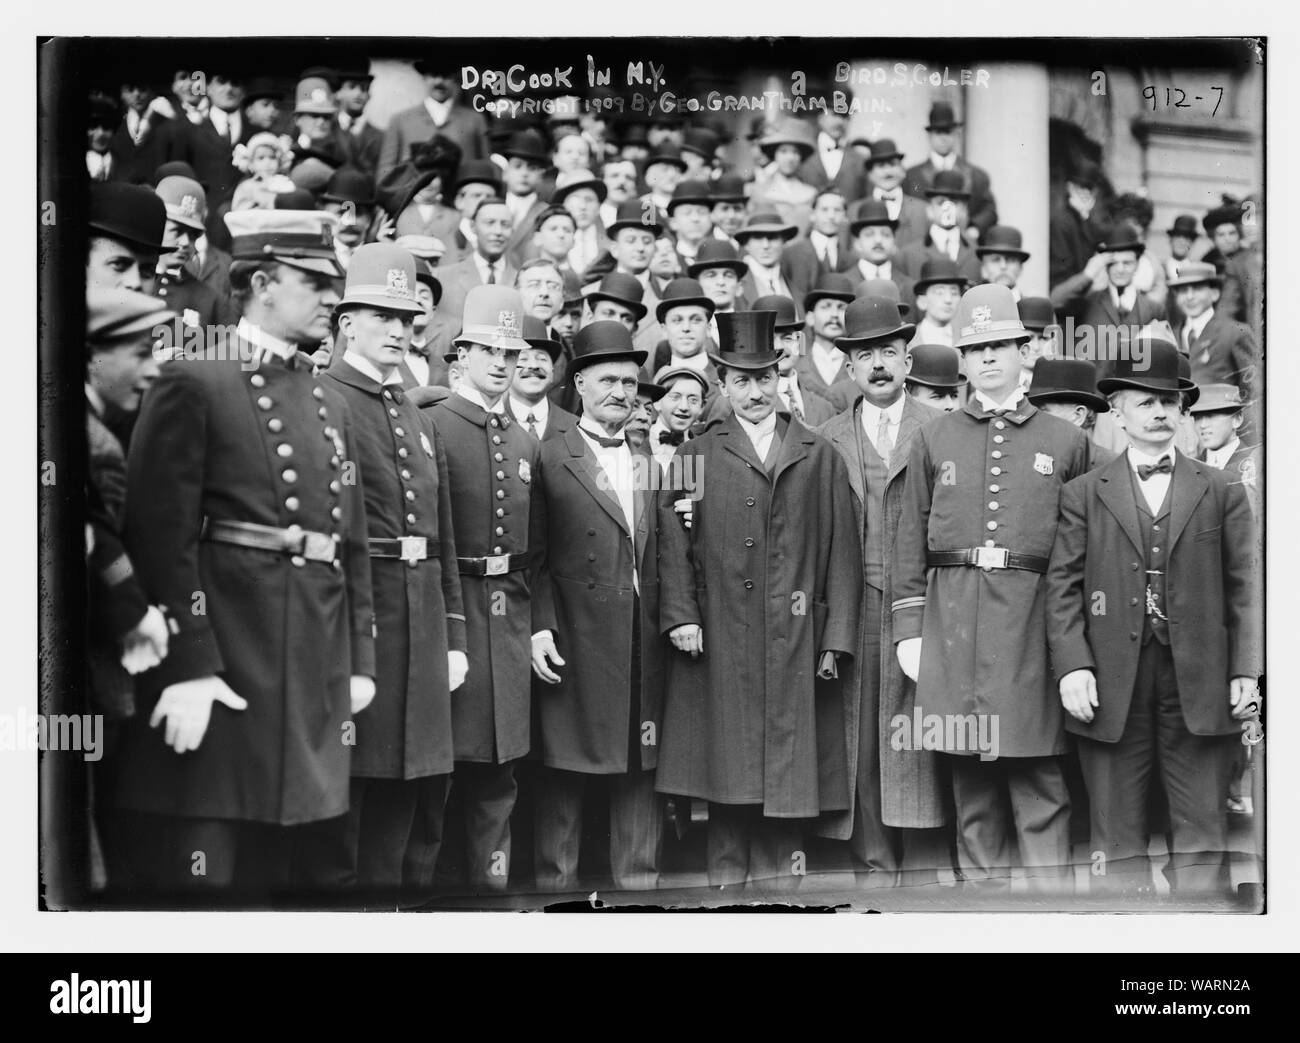 Dr. Cook, Bird S. Coler, police officers and others, New York Stock Photo